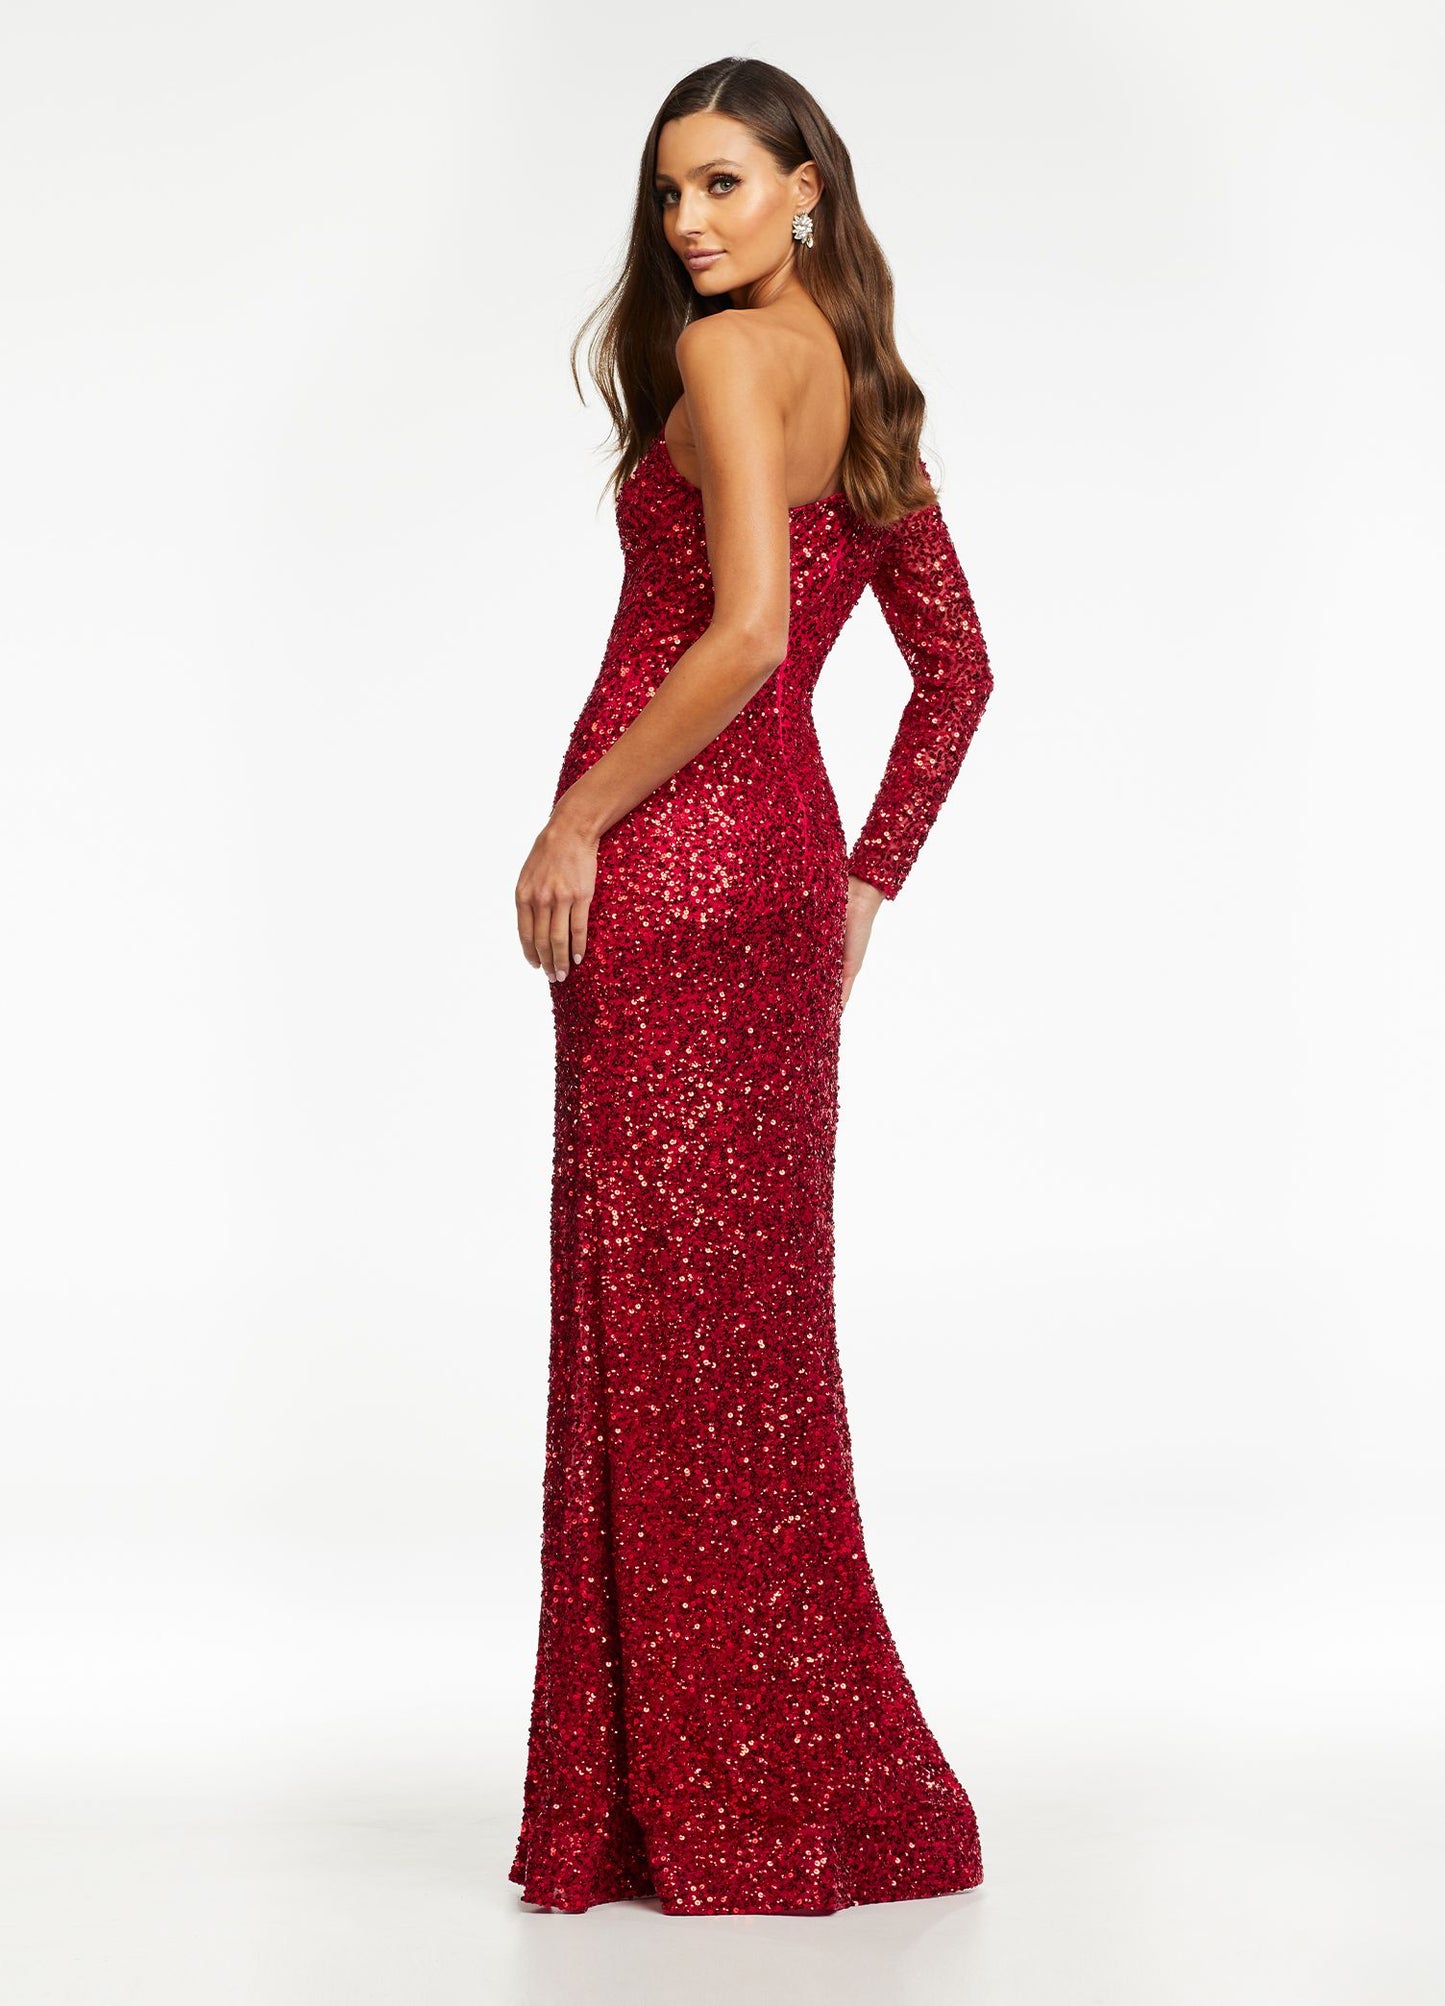 Ashley Lauren 1977 Prom Pageant Dress One Sleeve Fully Beaded Long Formal Dress with High Side Slit